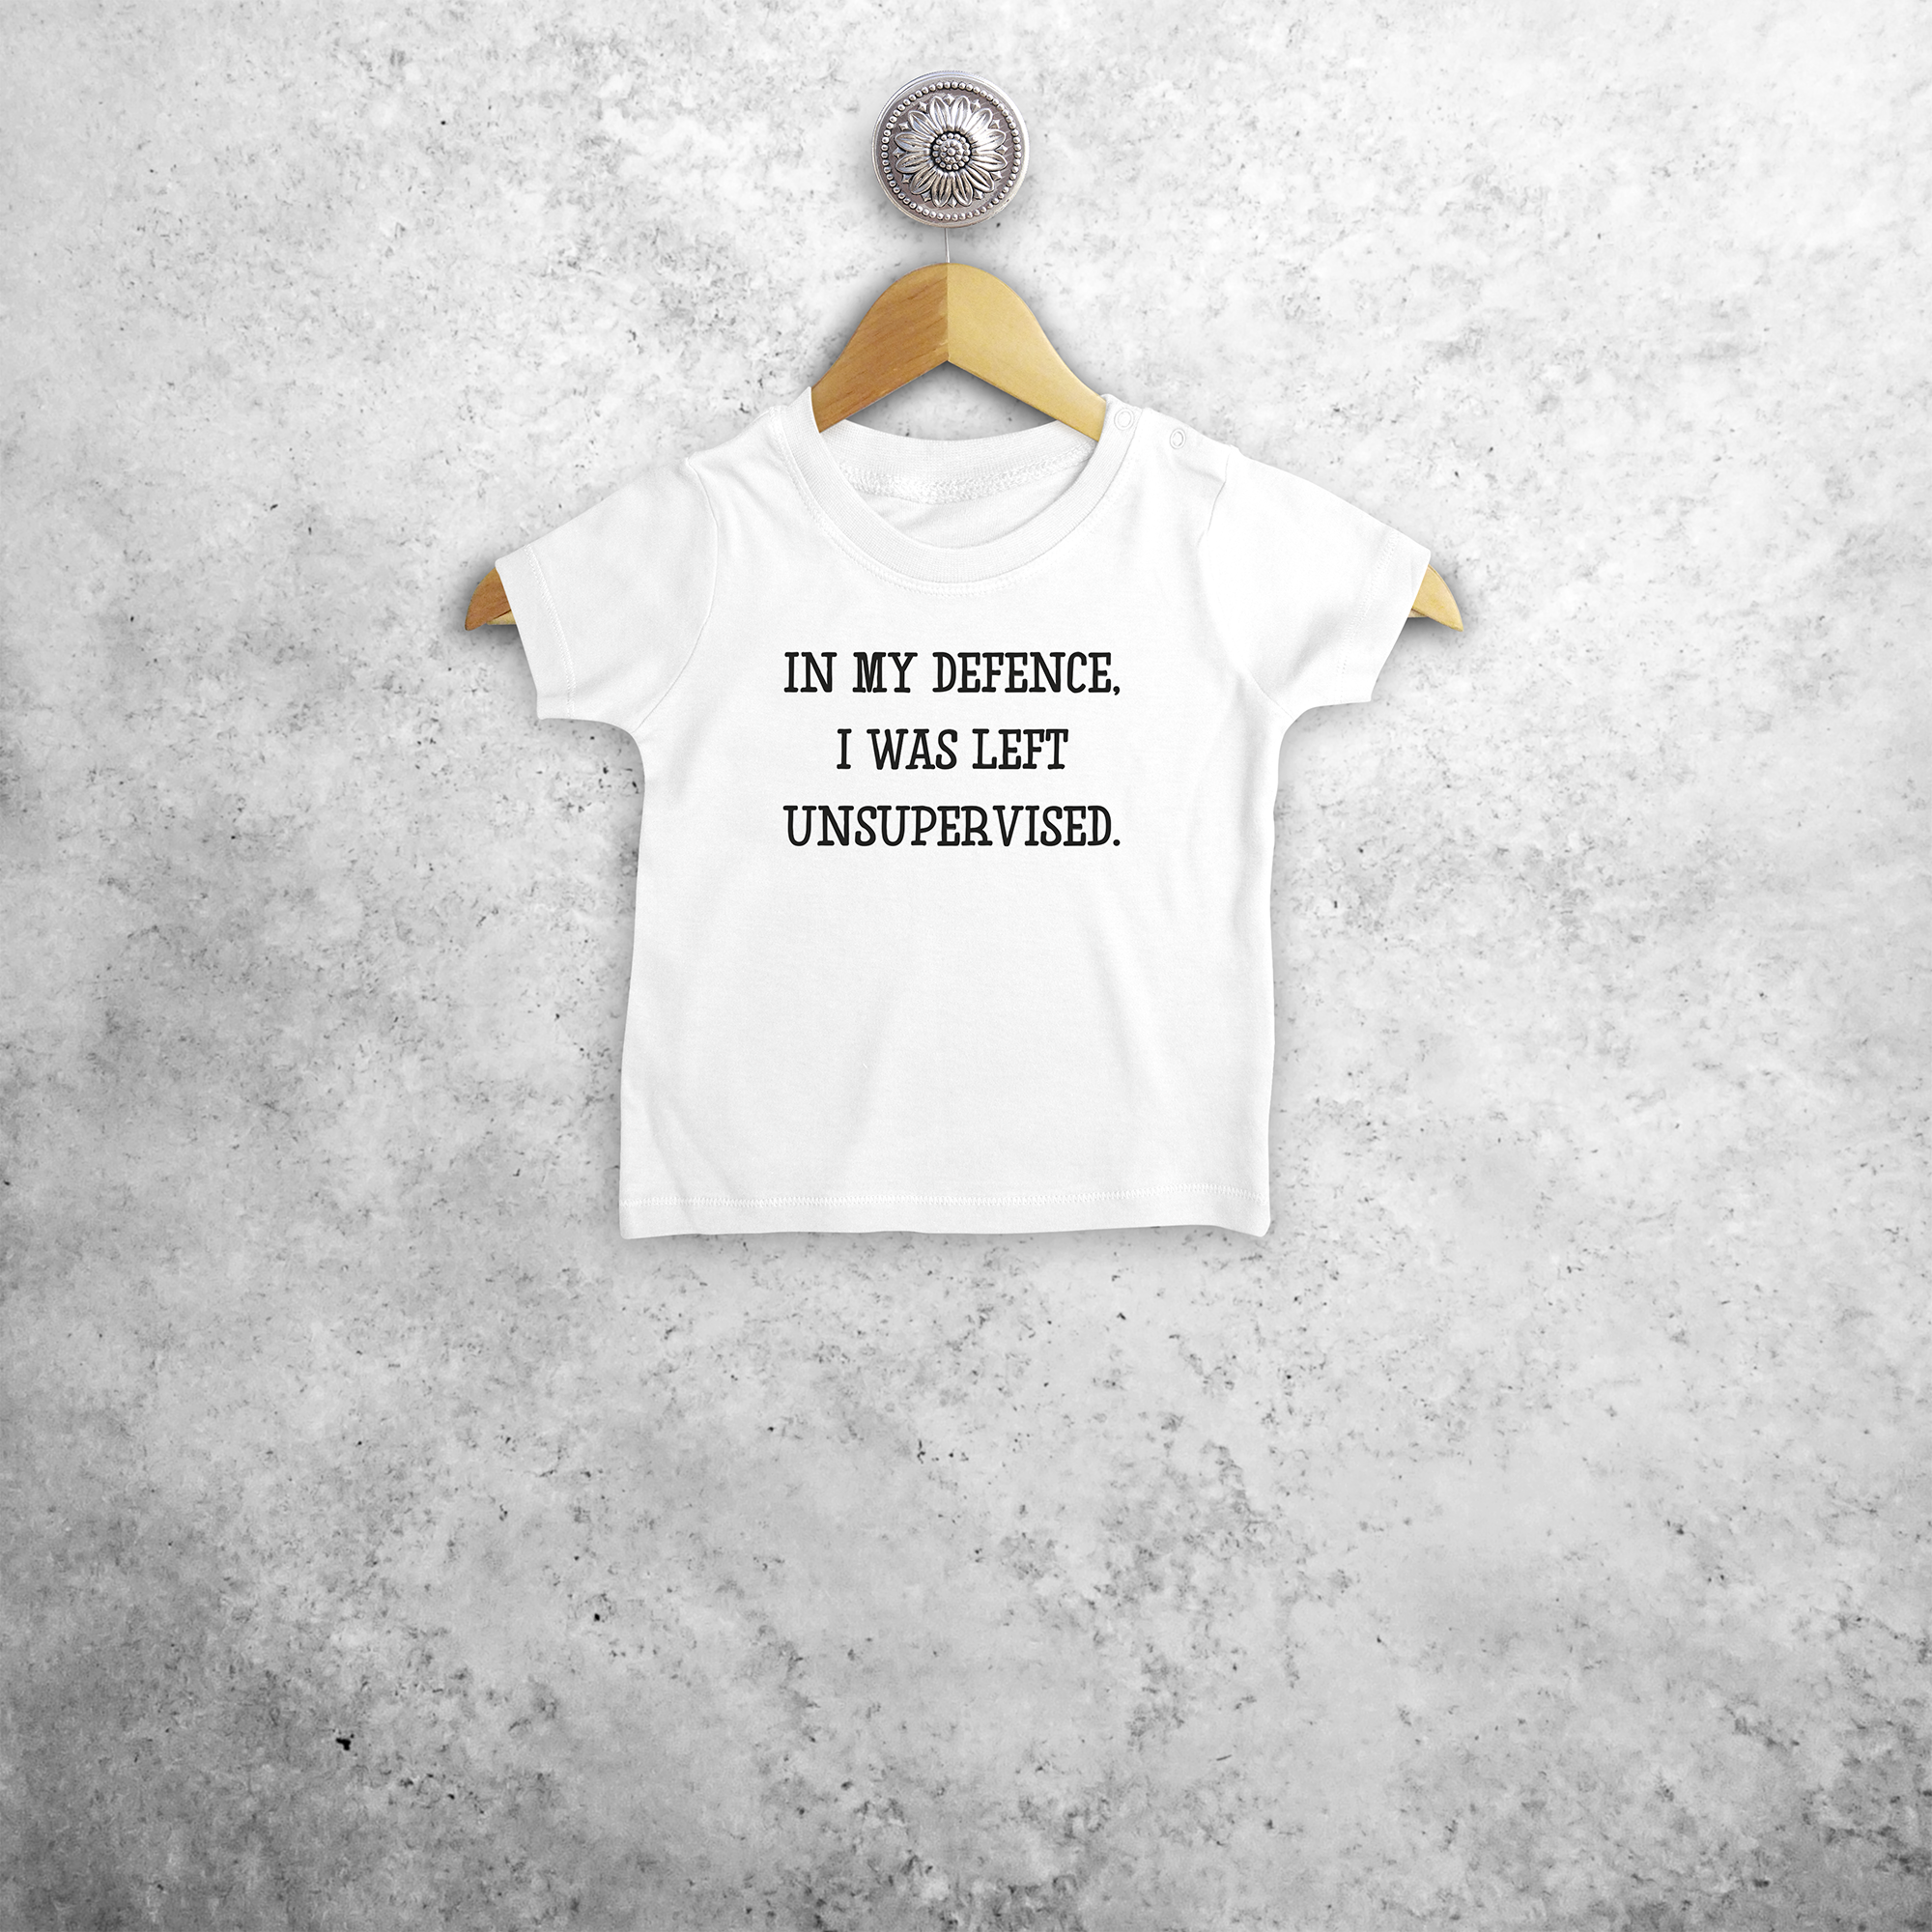 'In my defence, I was left unsupervised' baby shortsleeve shirt